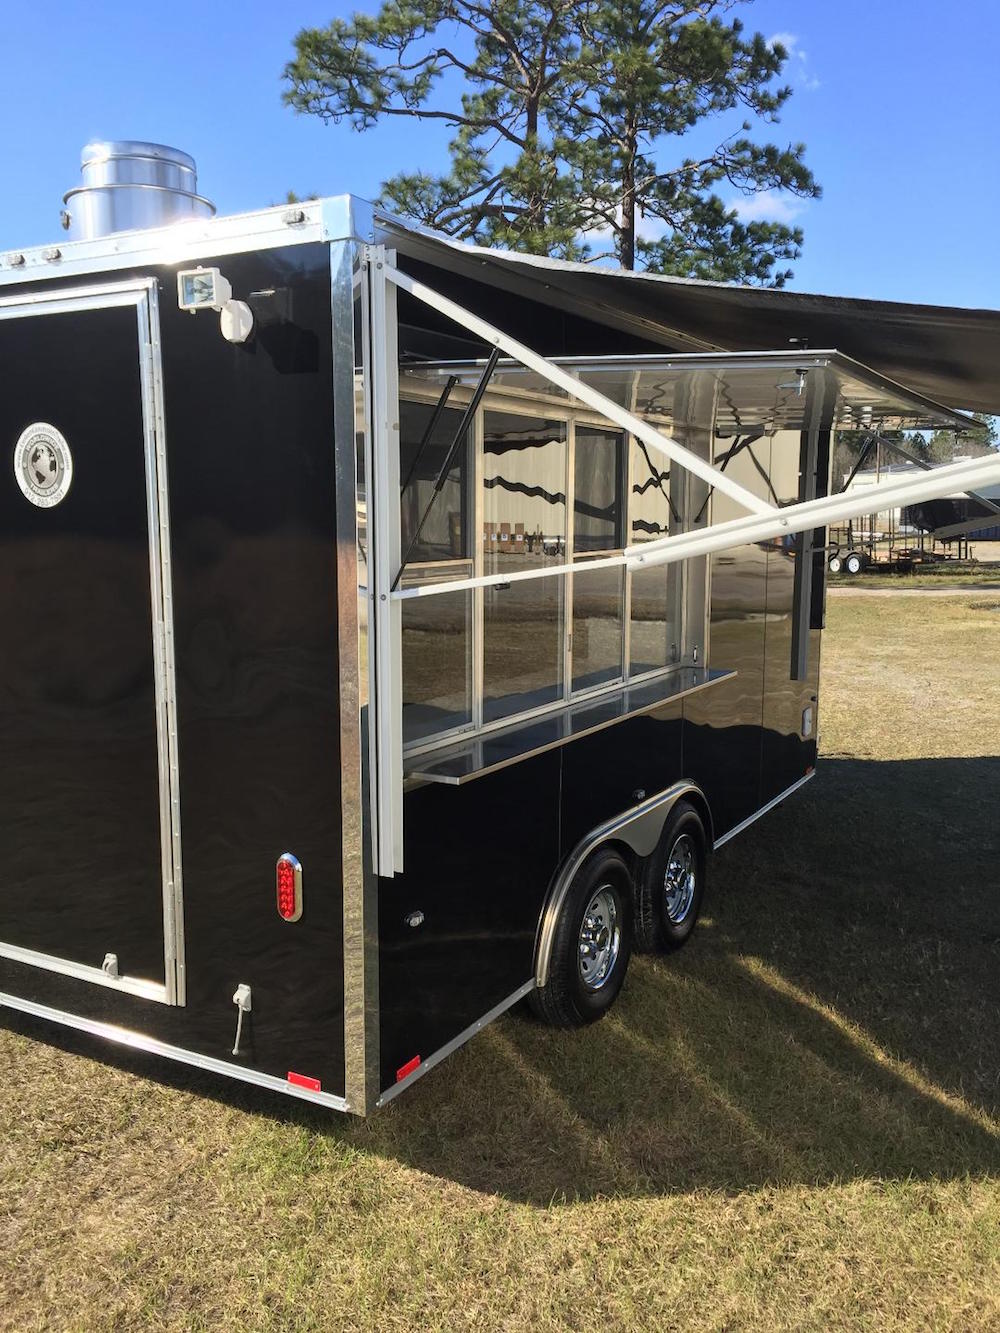 A black trailer with awning and lights on the side.